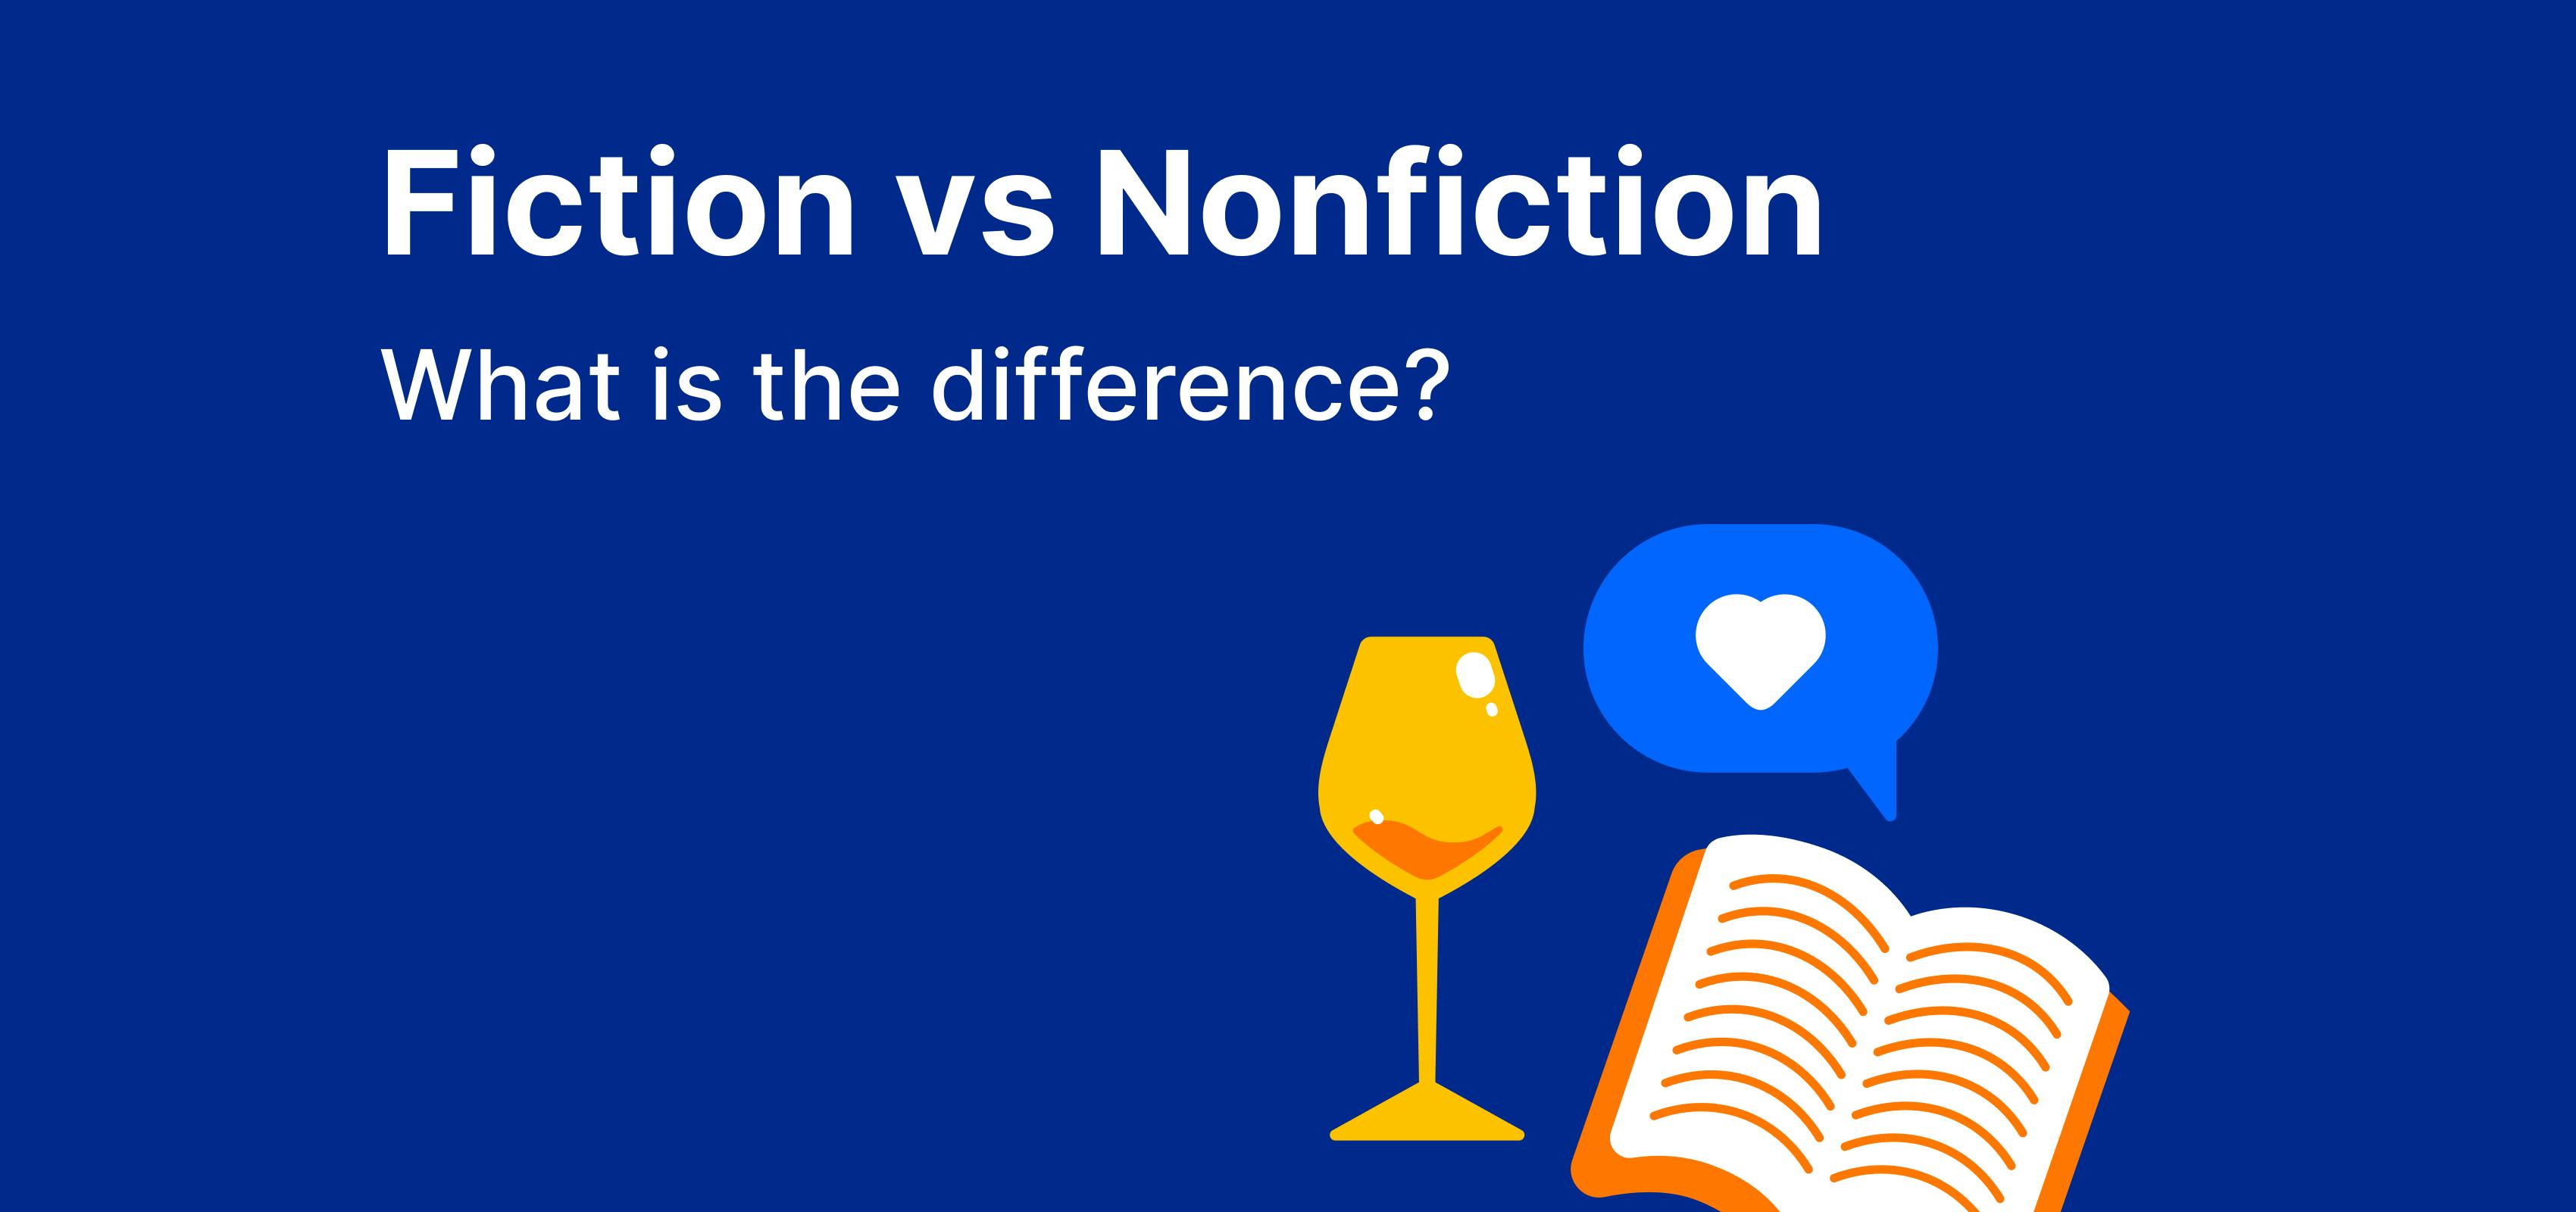 Fiction vs Nonfiction: What is the difference?